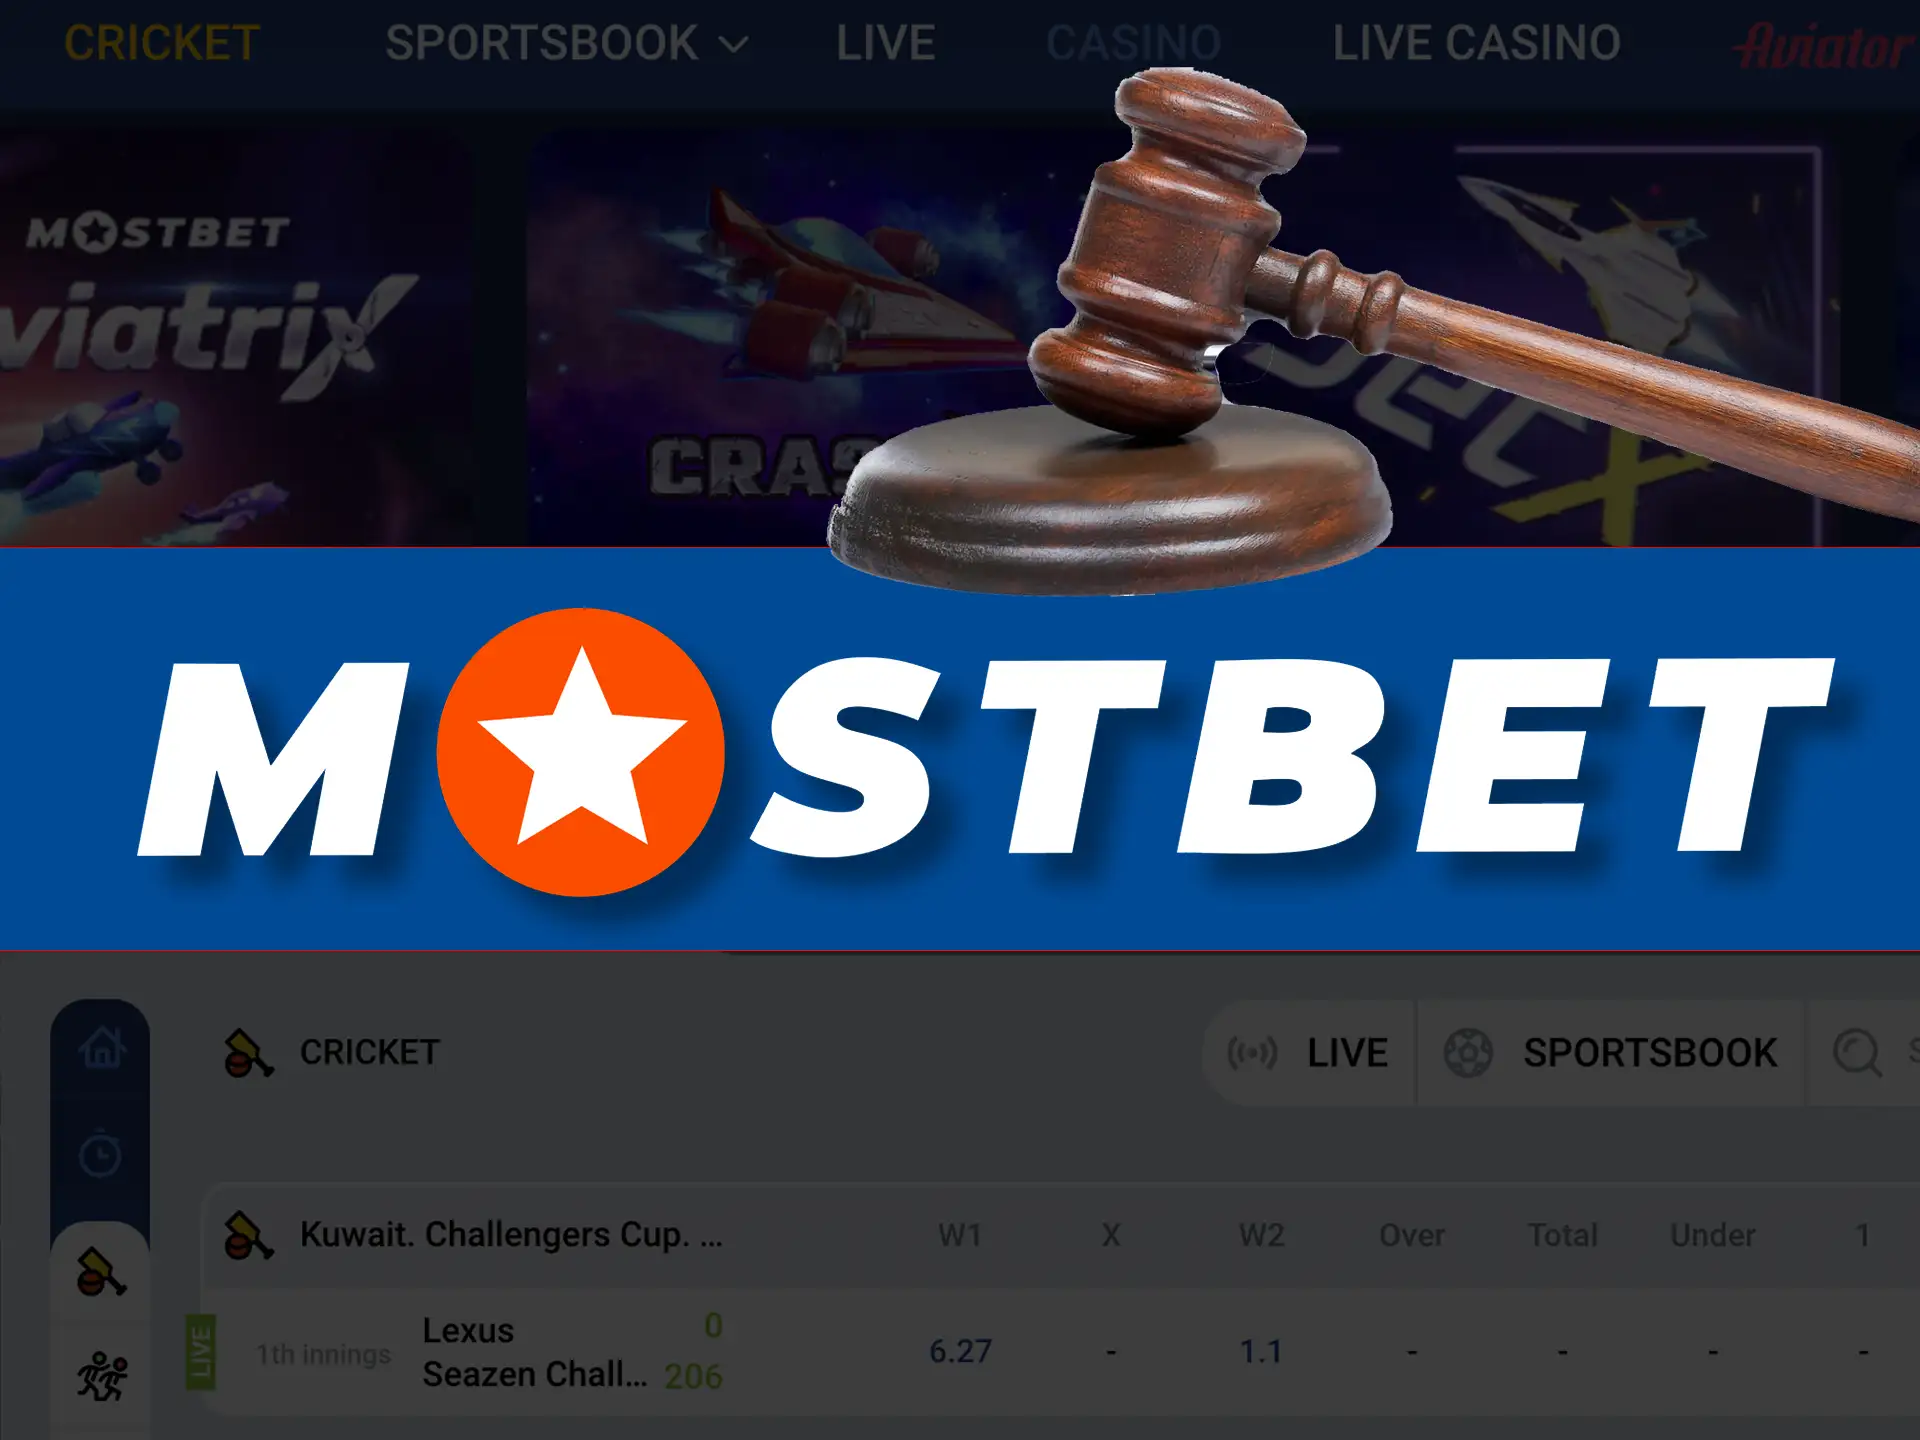 Mostbet is a world renowned bookmaker operating legally, licensed by the Curacao E-Gaming Commission.